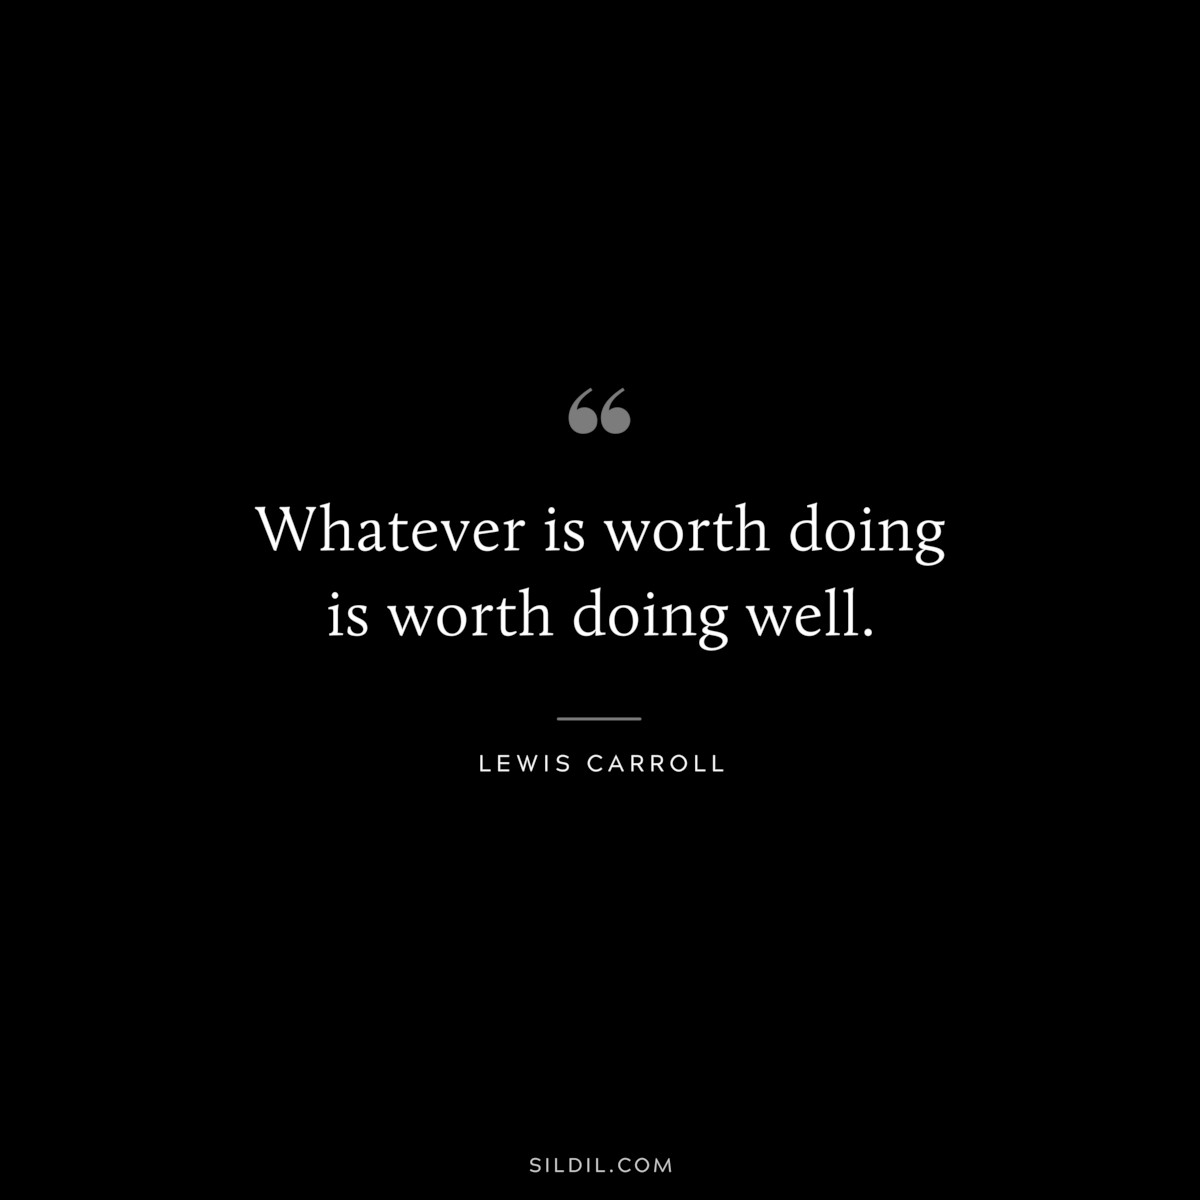 Whatever is worth doing is worth doing well.